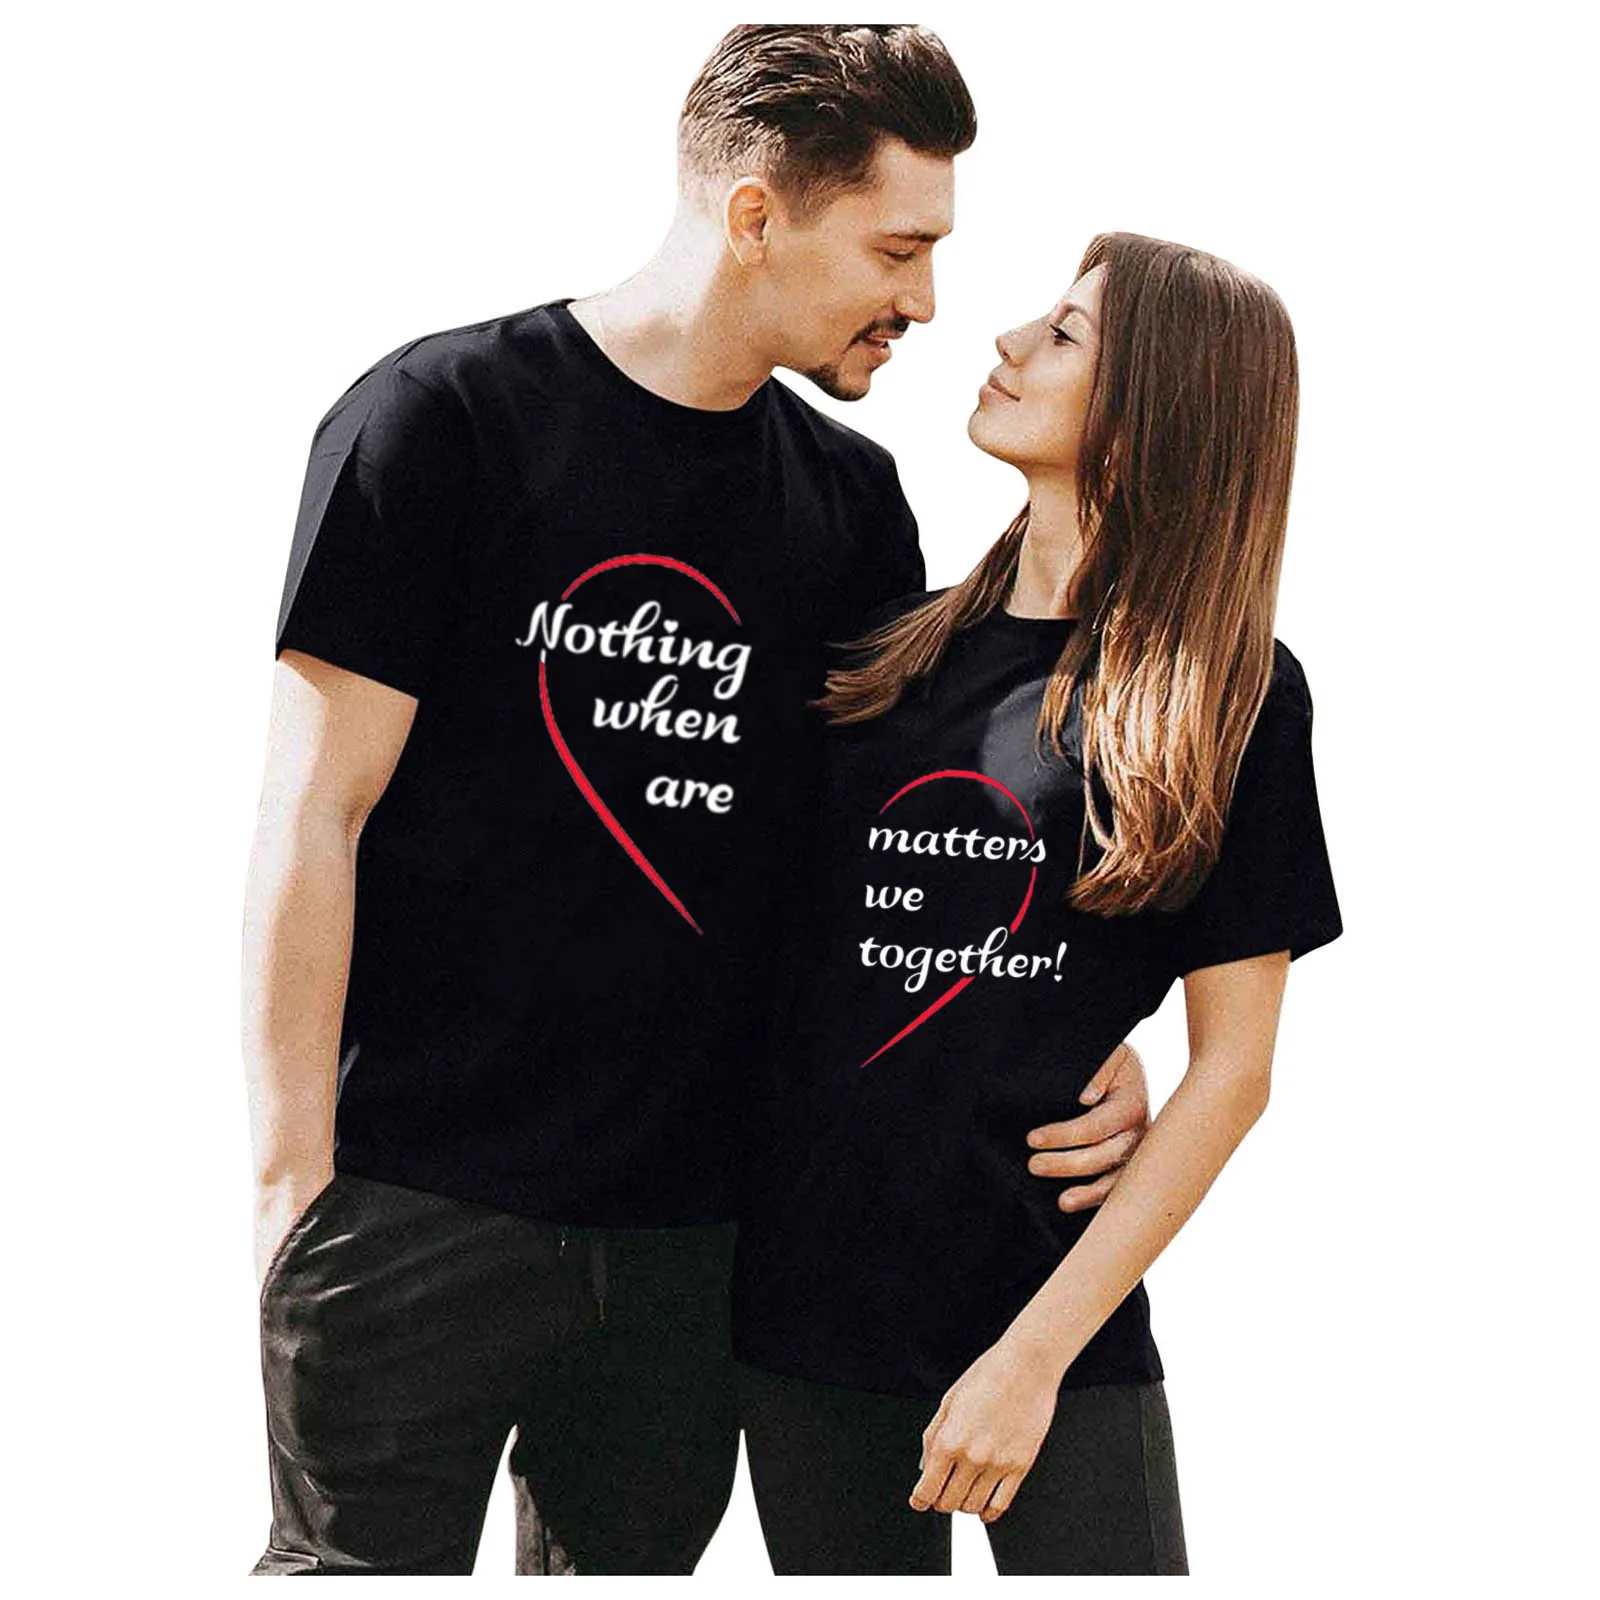 Fashion Matching Tee Women T-Shirts Short Sleeves O Neck Sweet Letter Print Casual Men's Tops T Shirt Valentine's Day Couple Top